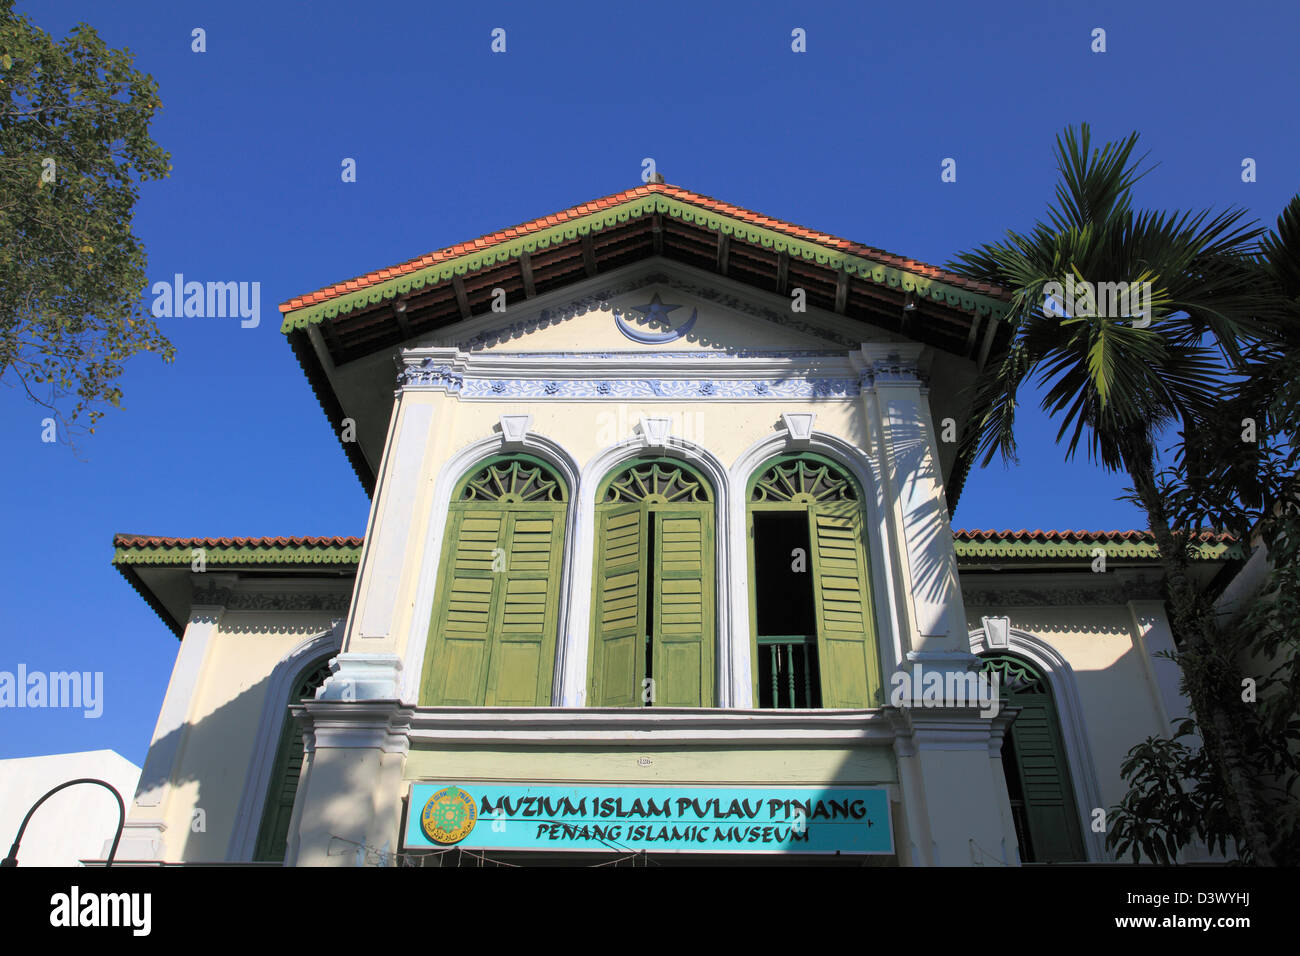 Malaysia, Penang, Georgetown, islamisches Museum, Stockfoto